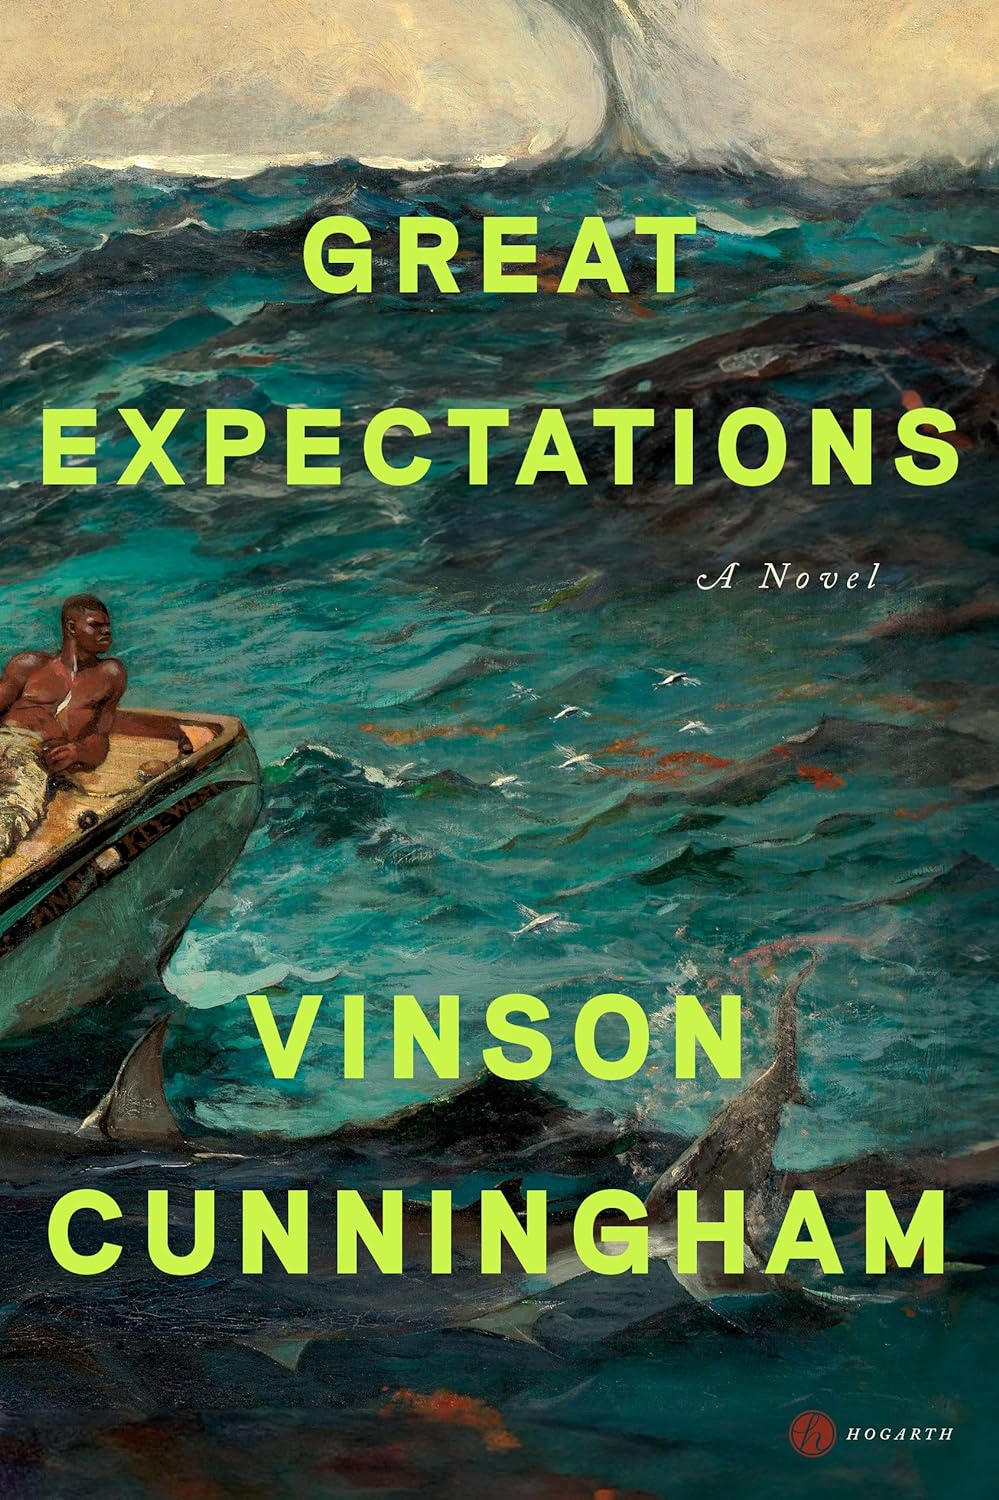 The cover of Great Expectations